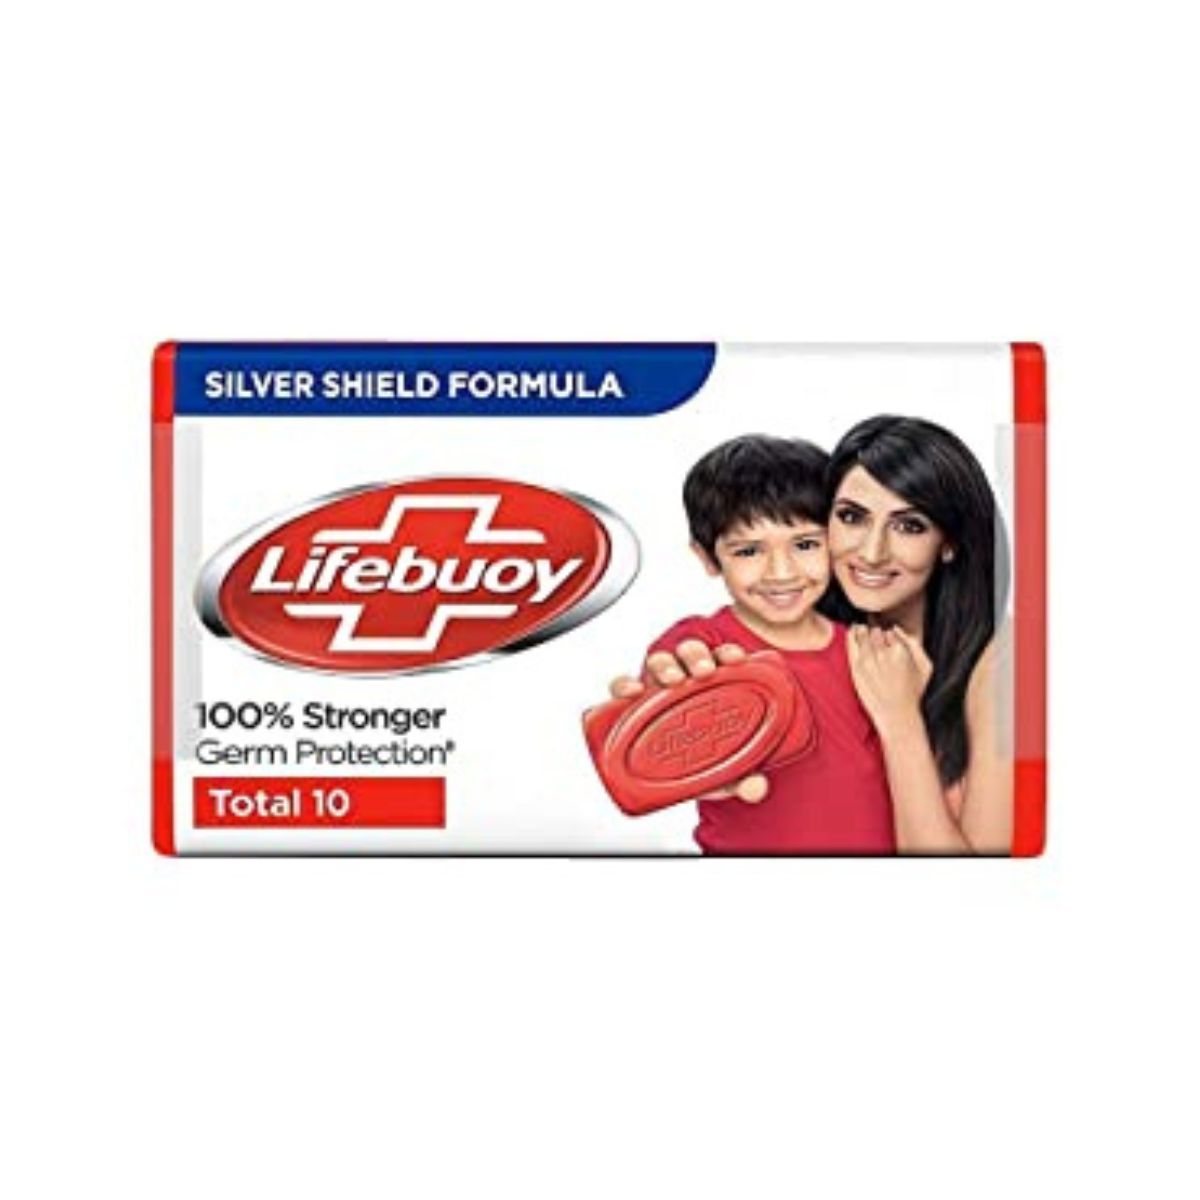 Lifebuoy Soap 100% Stronger Germ Protection Total 10 - 125g